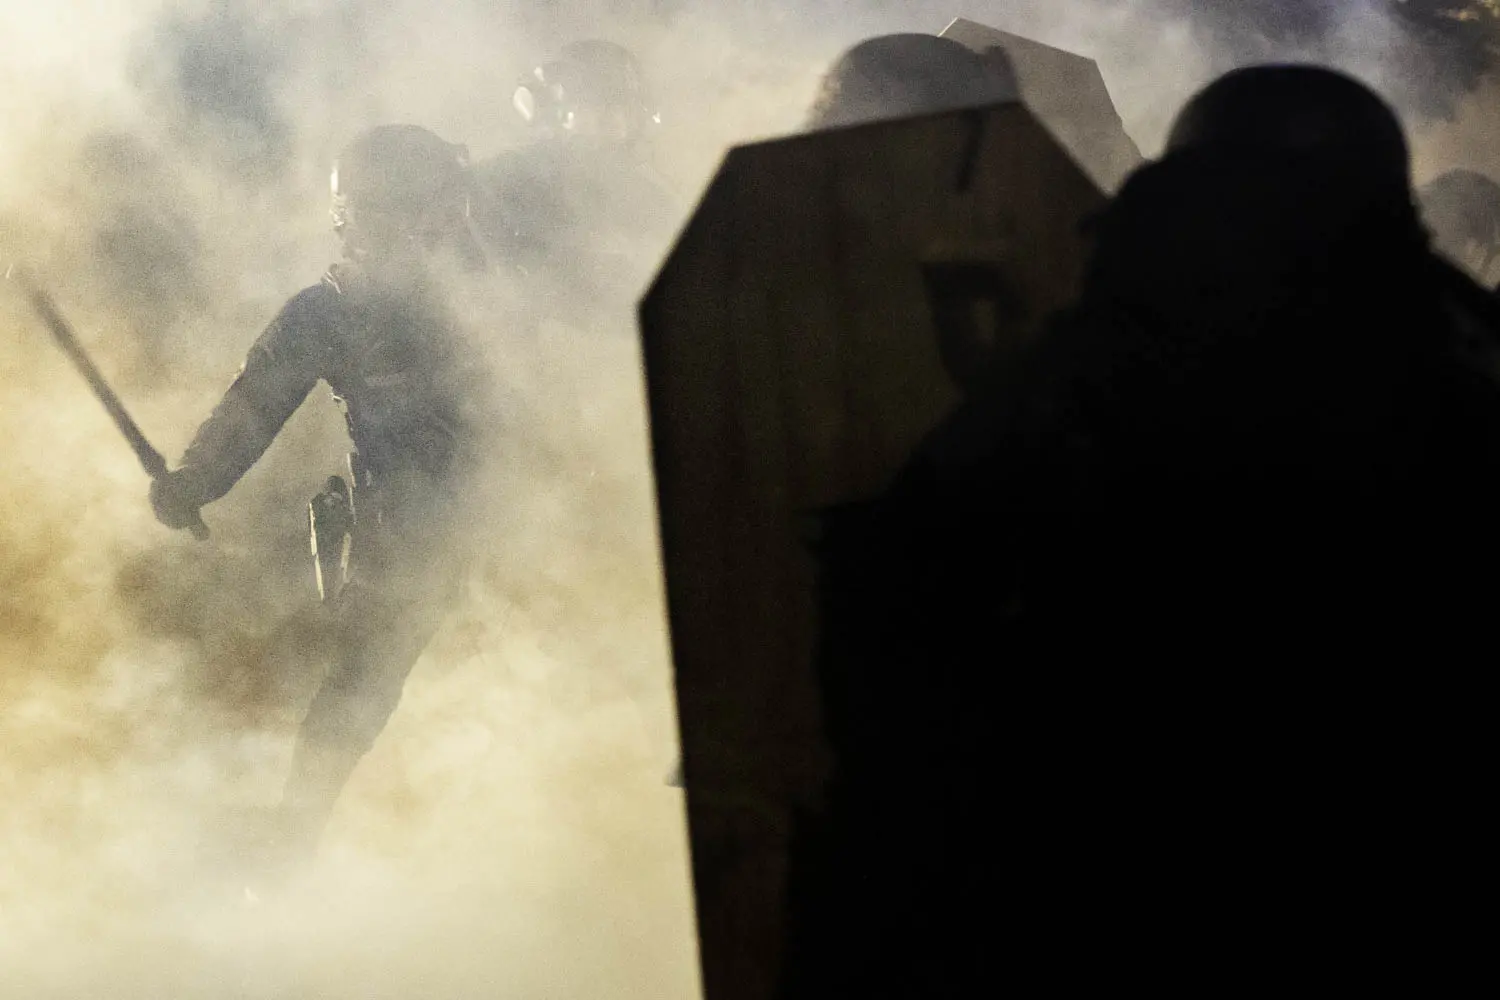 A Portland Police officer wields a billy club against a protester amidst a cloud of teargas<br />
 outside of the North precinct in Portland, Oregon.